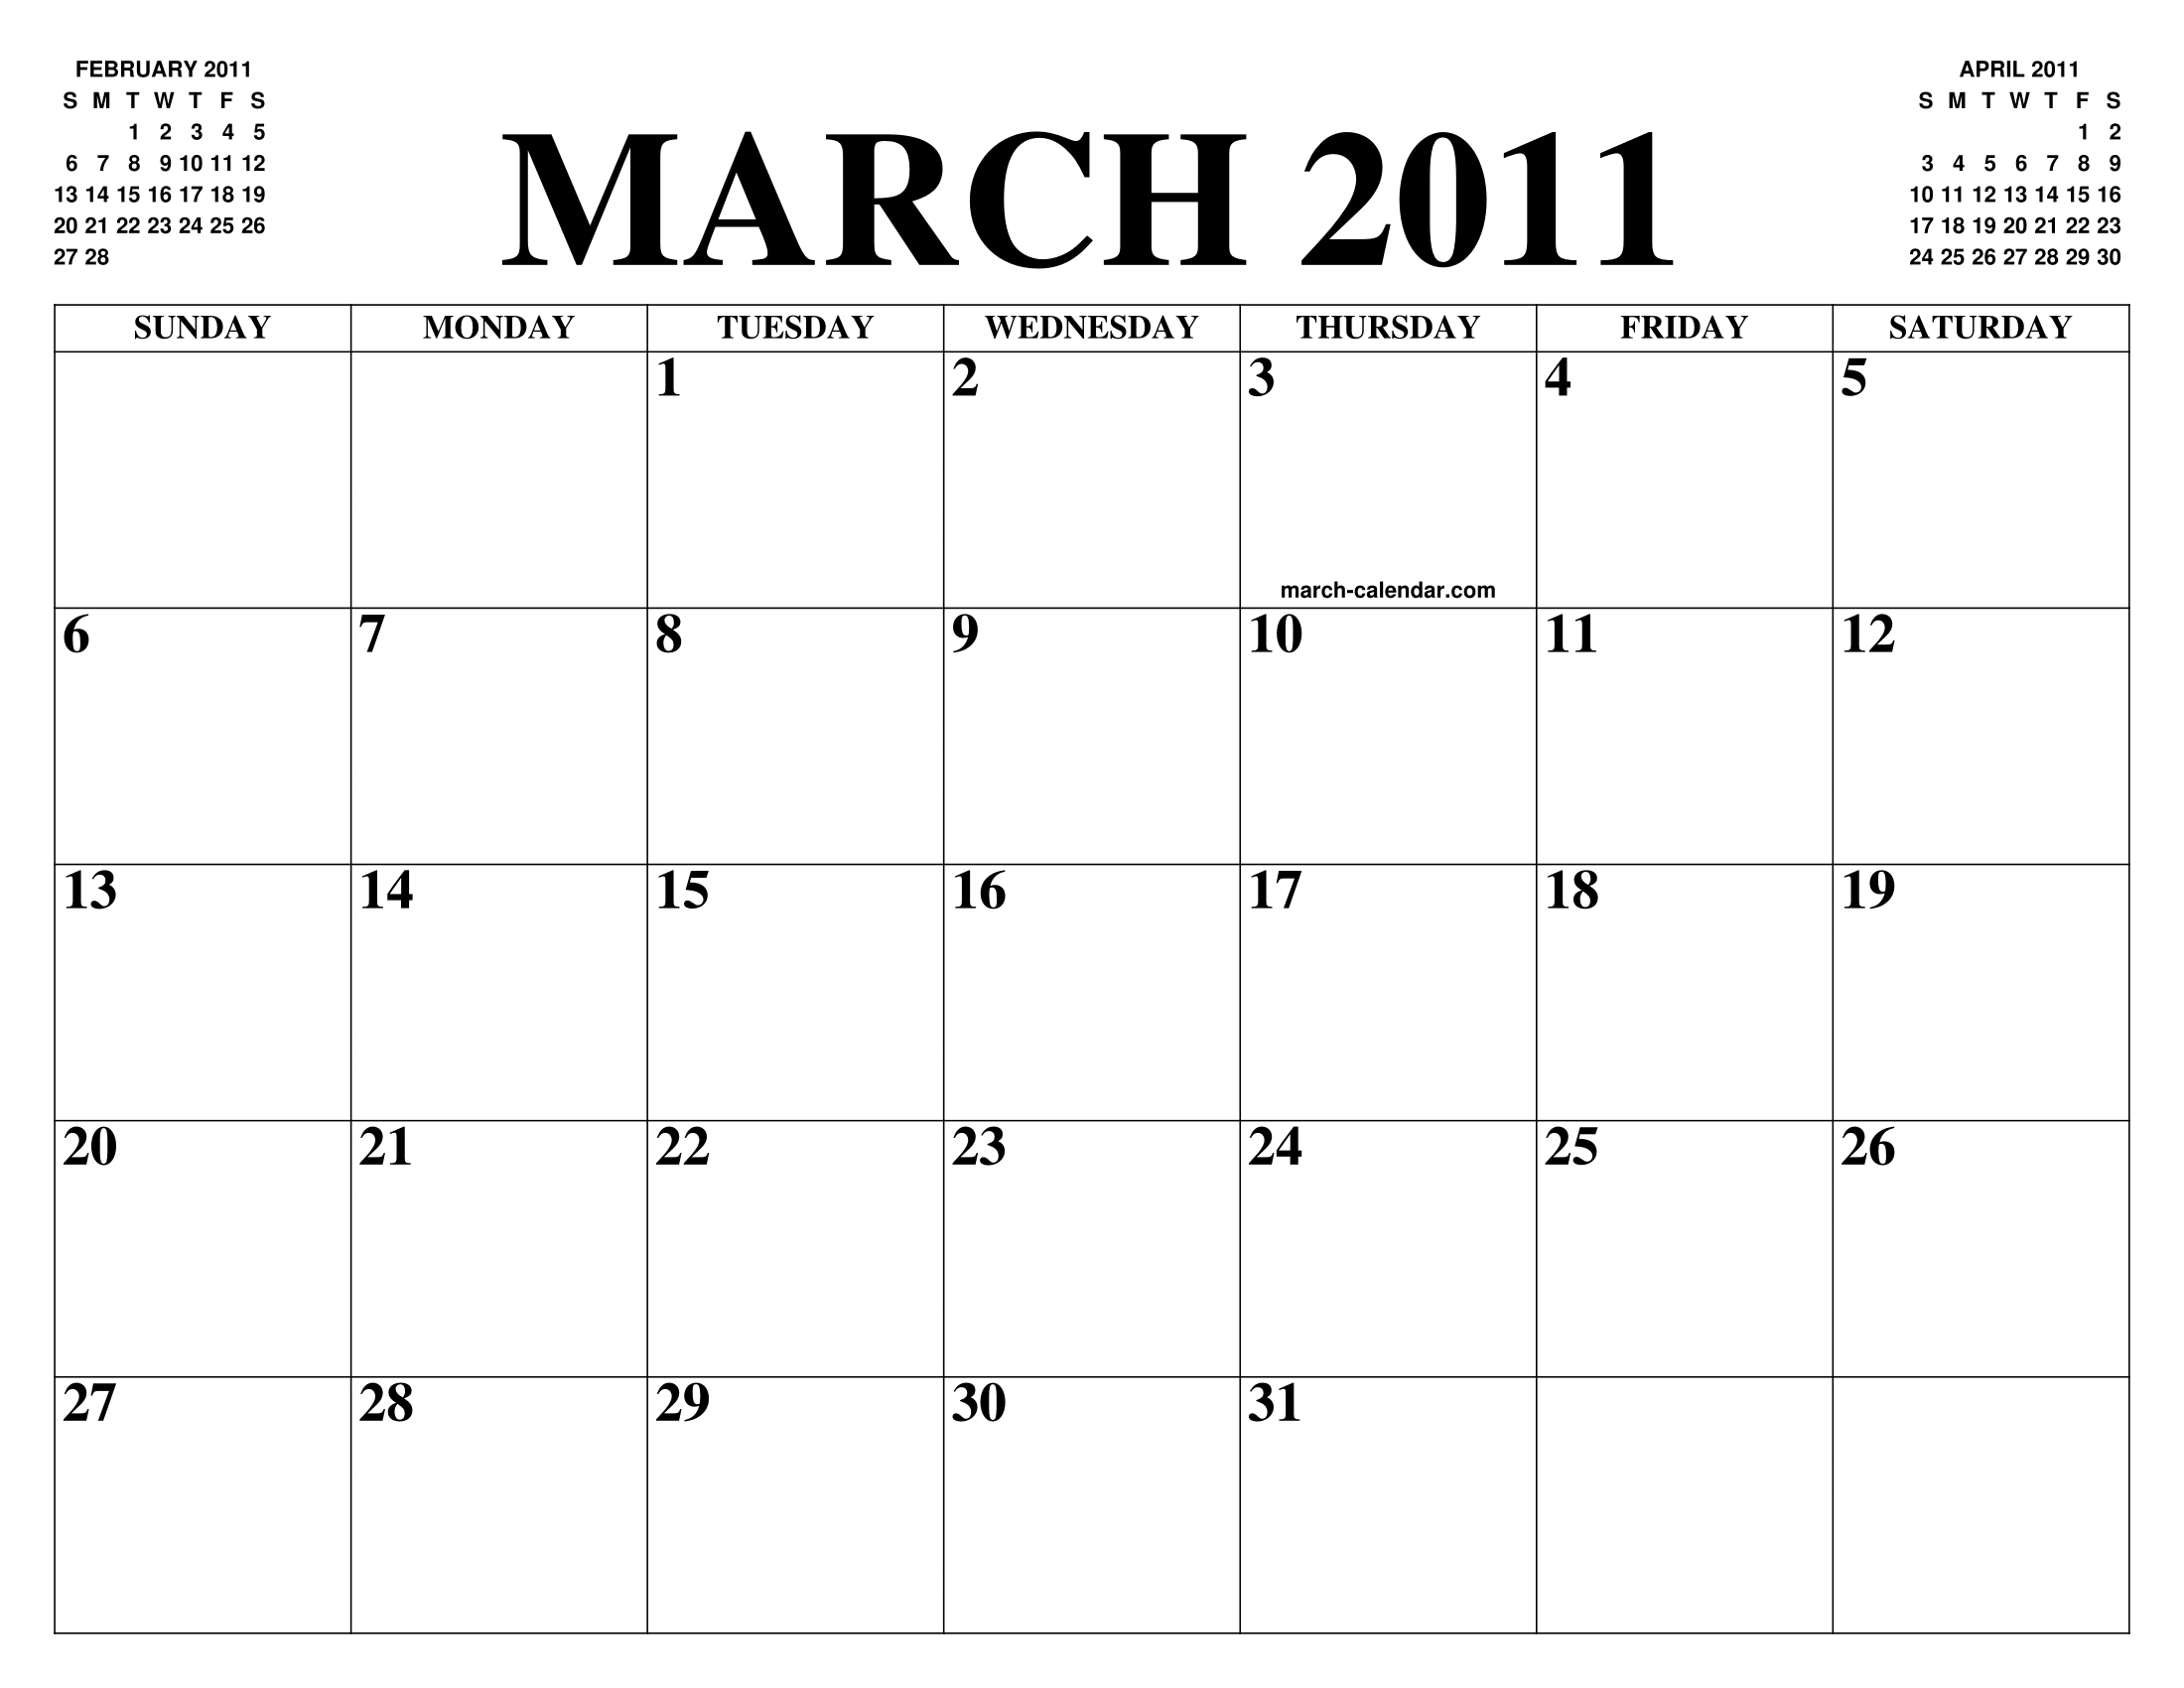 MARCH 2011 CALENDAR OF THE MONTH: FREE PRINTABLE MARCH CALENDAR OF THE